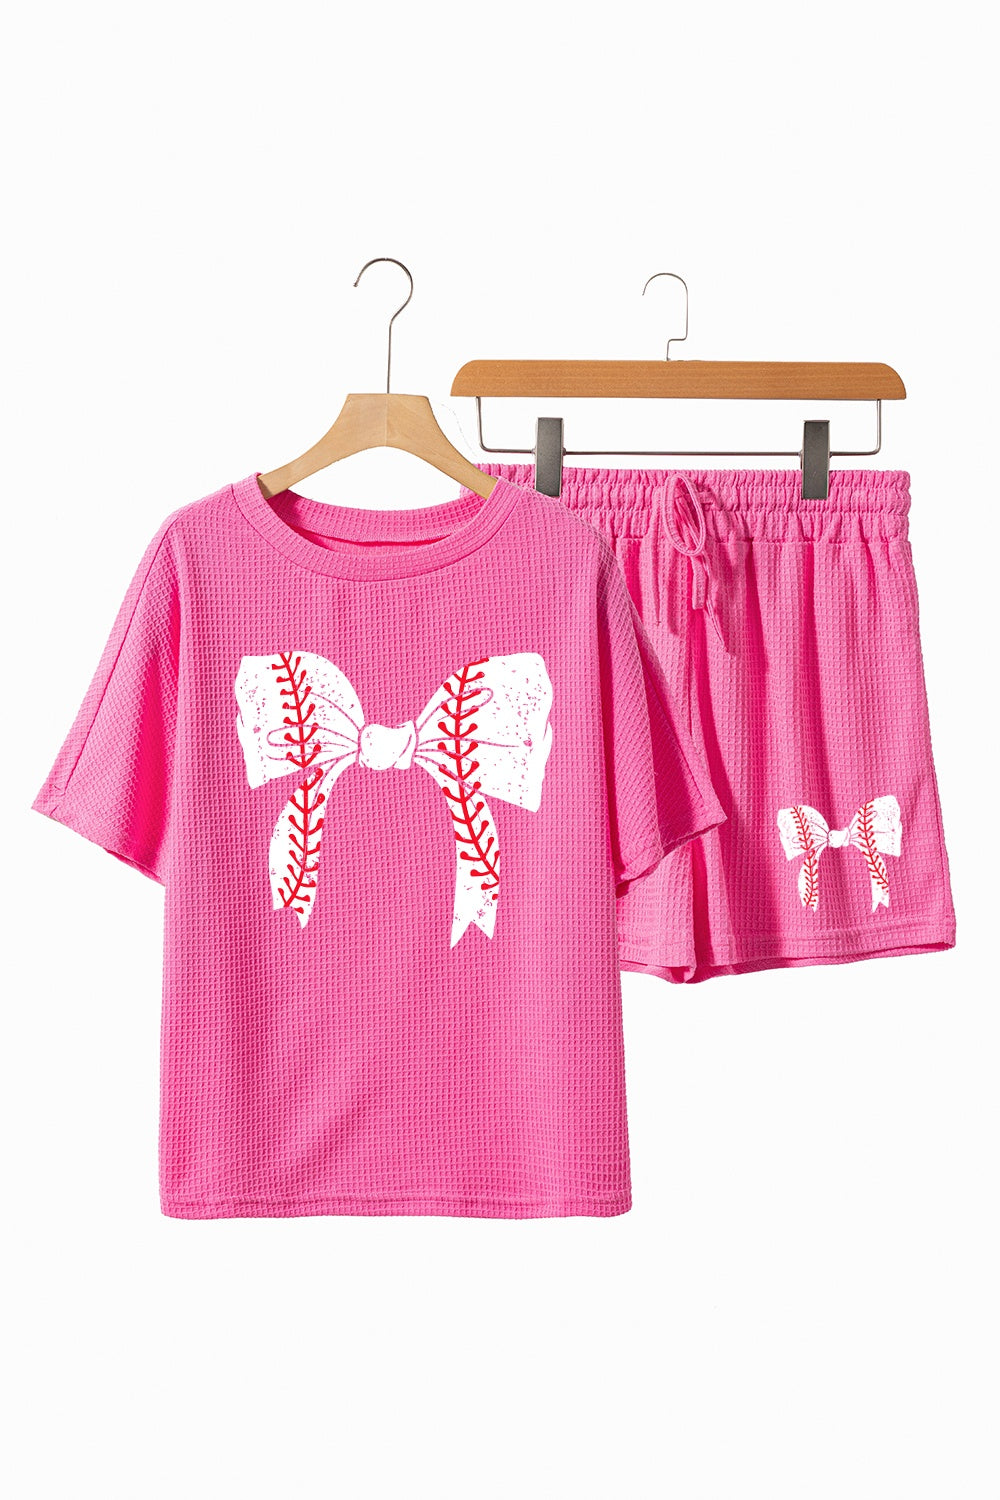 The Bow Spirit Top and Shorts Set